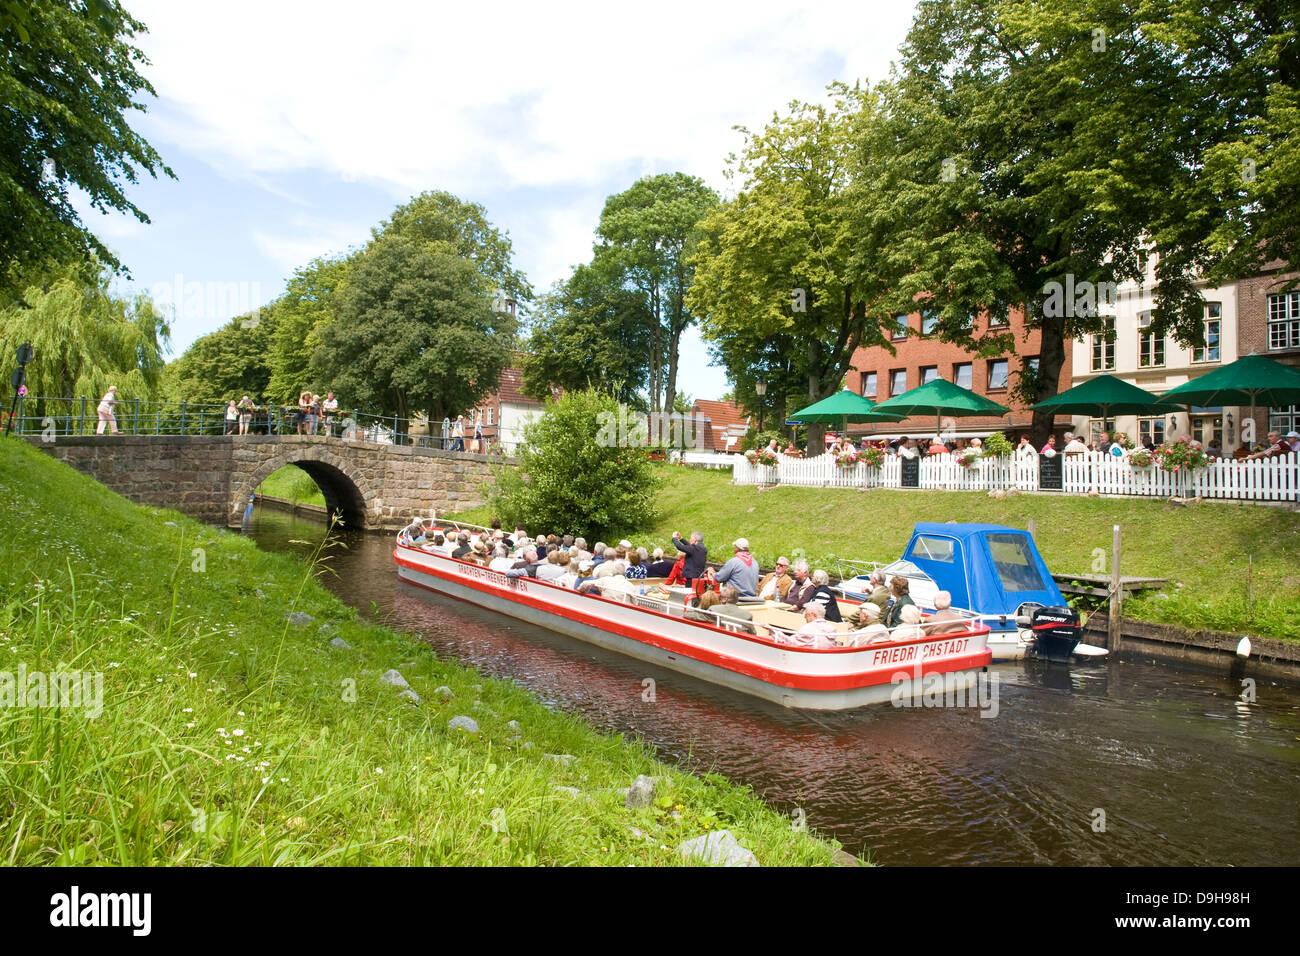 Canal journey in Friedrich's town, Canal trip in Friedrich's town, Stock Photo